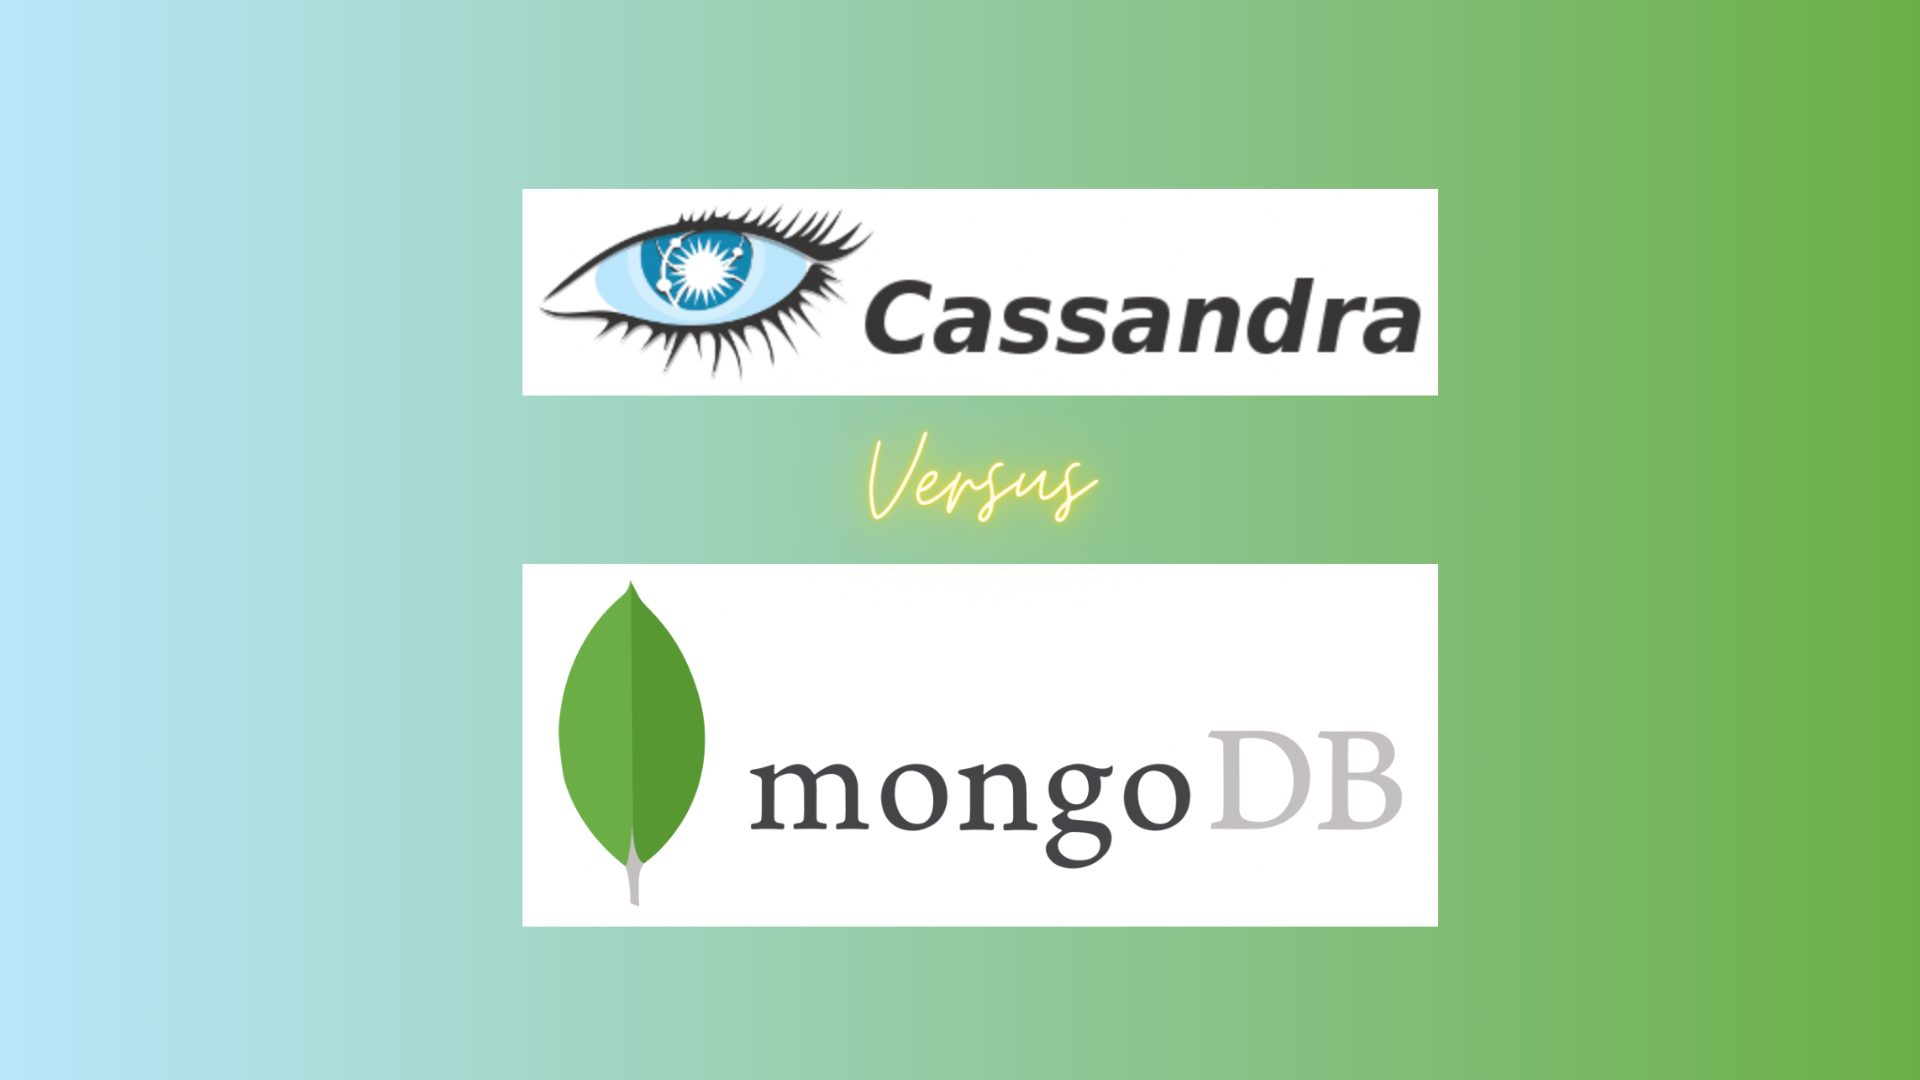 Apache Cassandra vs MongoDB with logos on a blended blue and green background.